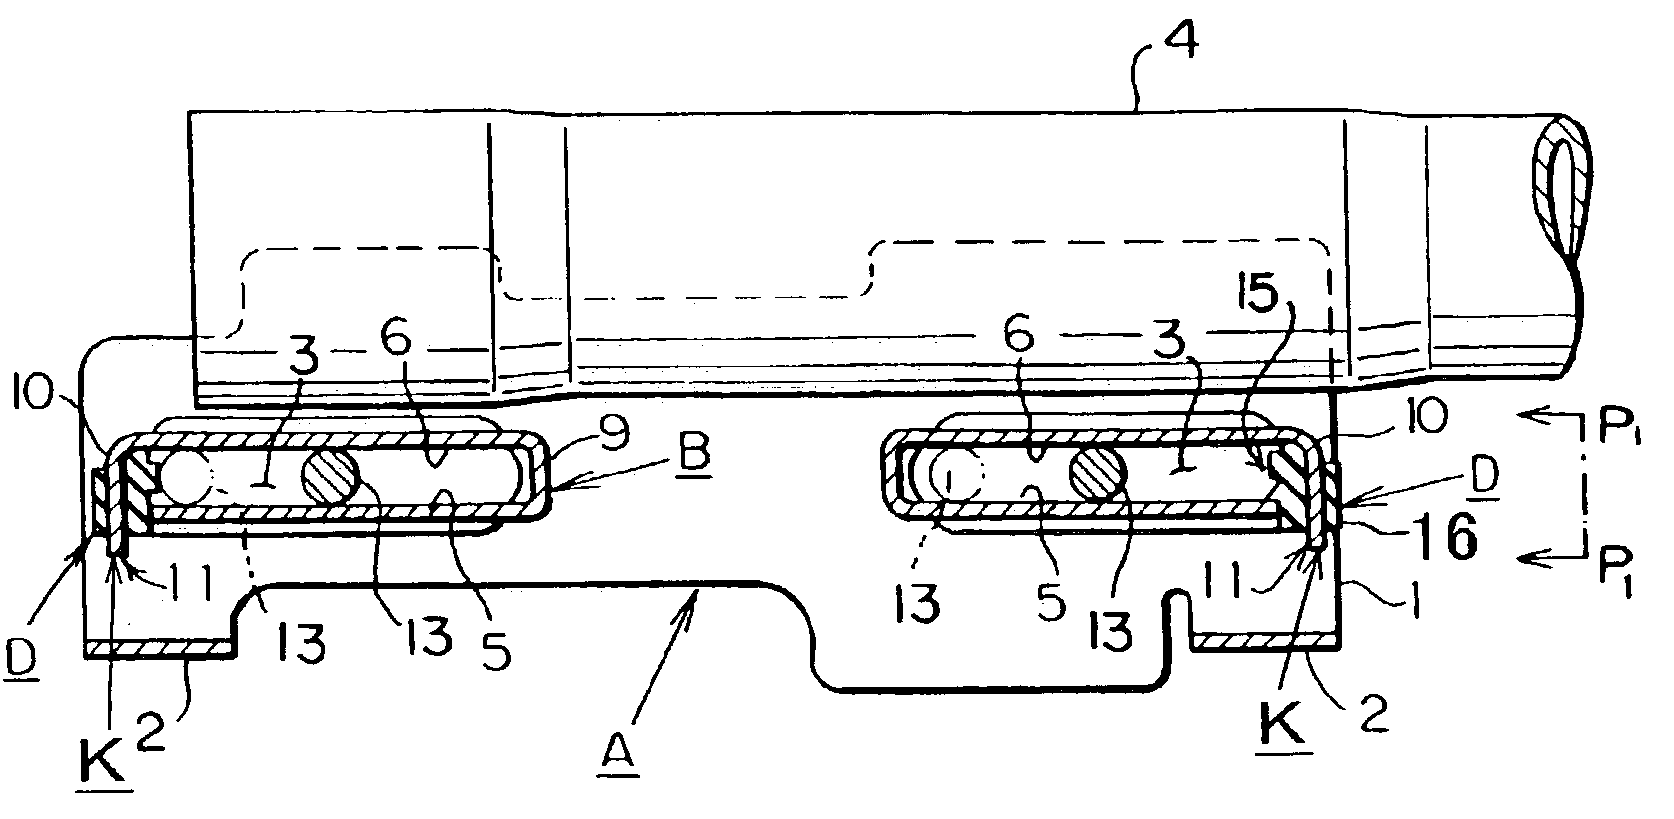 Position adjustment device for steering handle